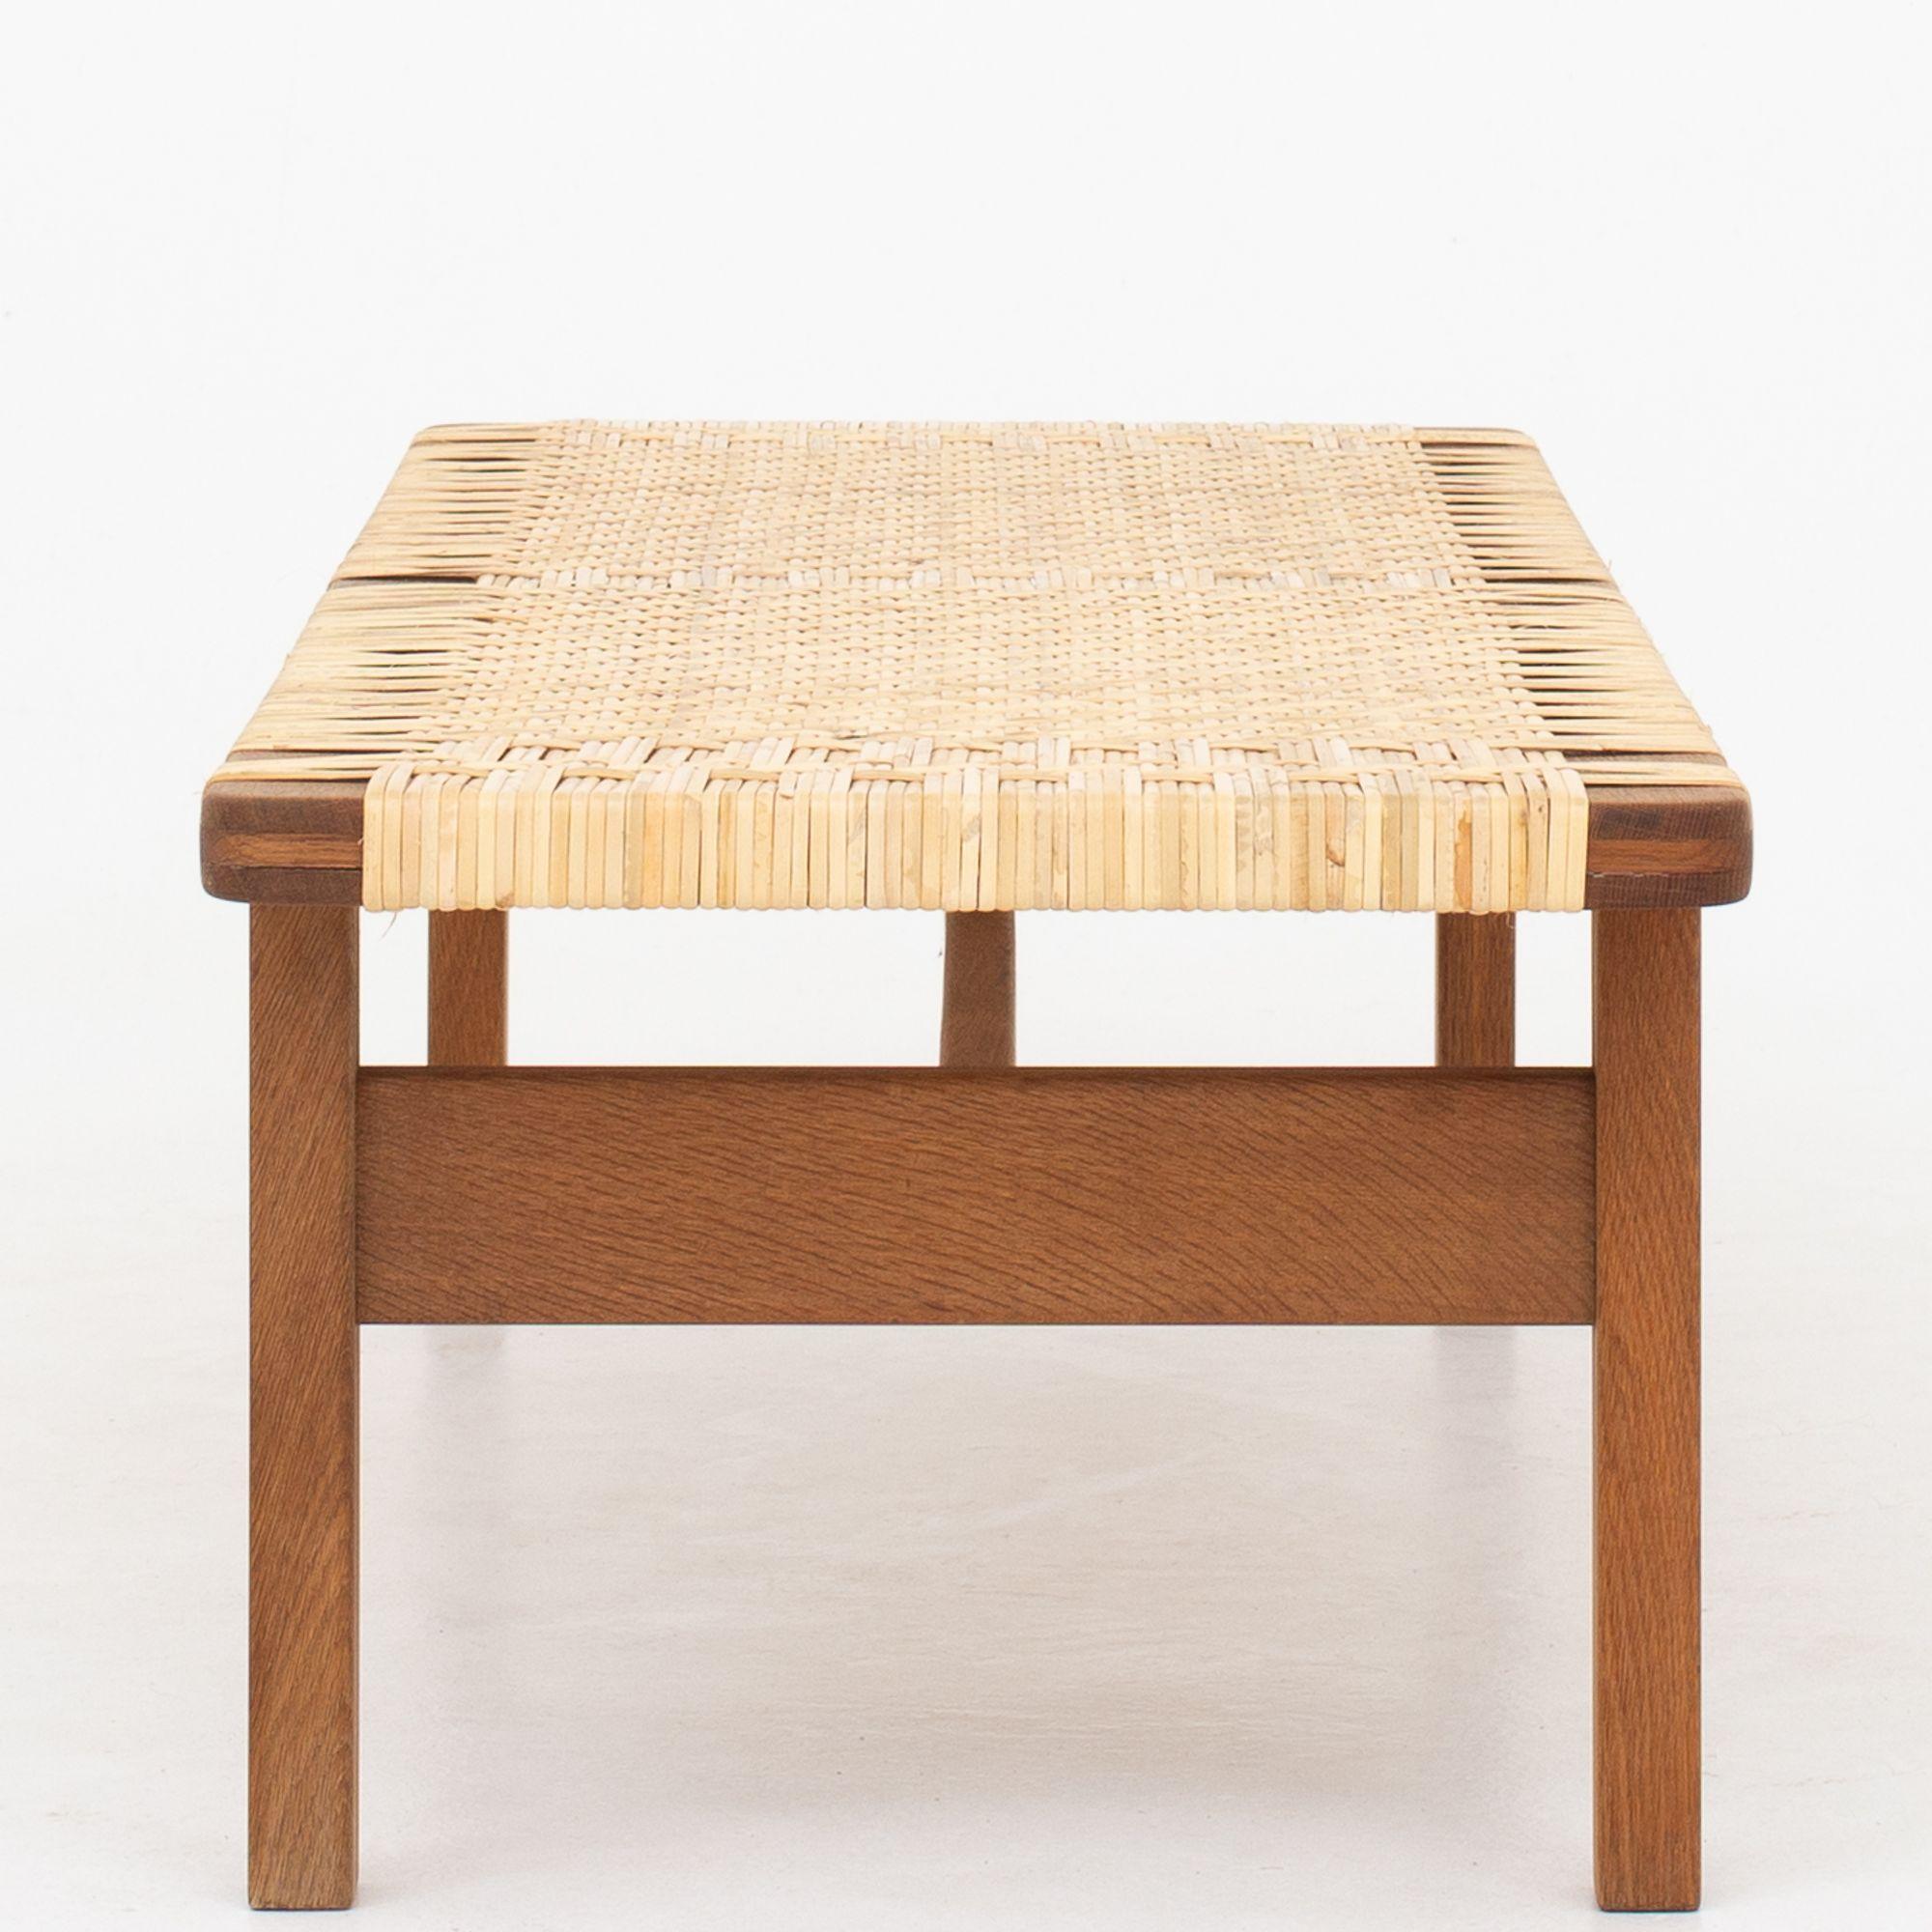 BM 5272 - bench/coffee table in oak and cane. Børge Mogensen / Fredericia Furniture.